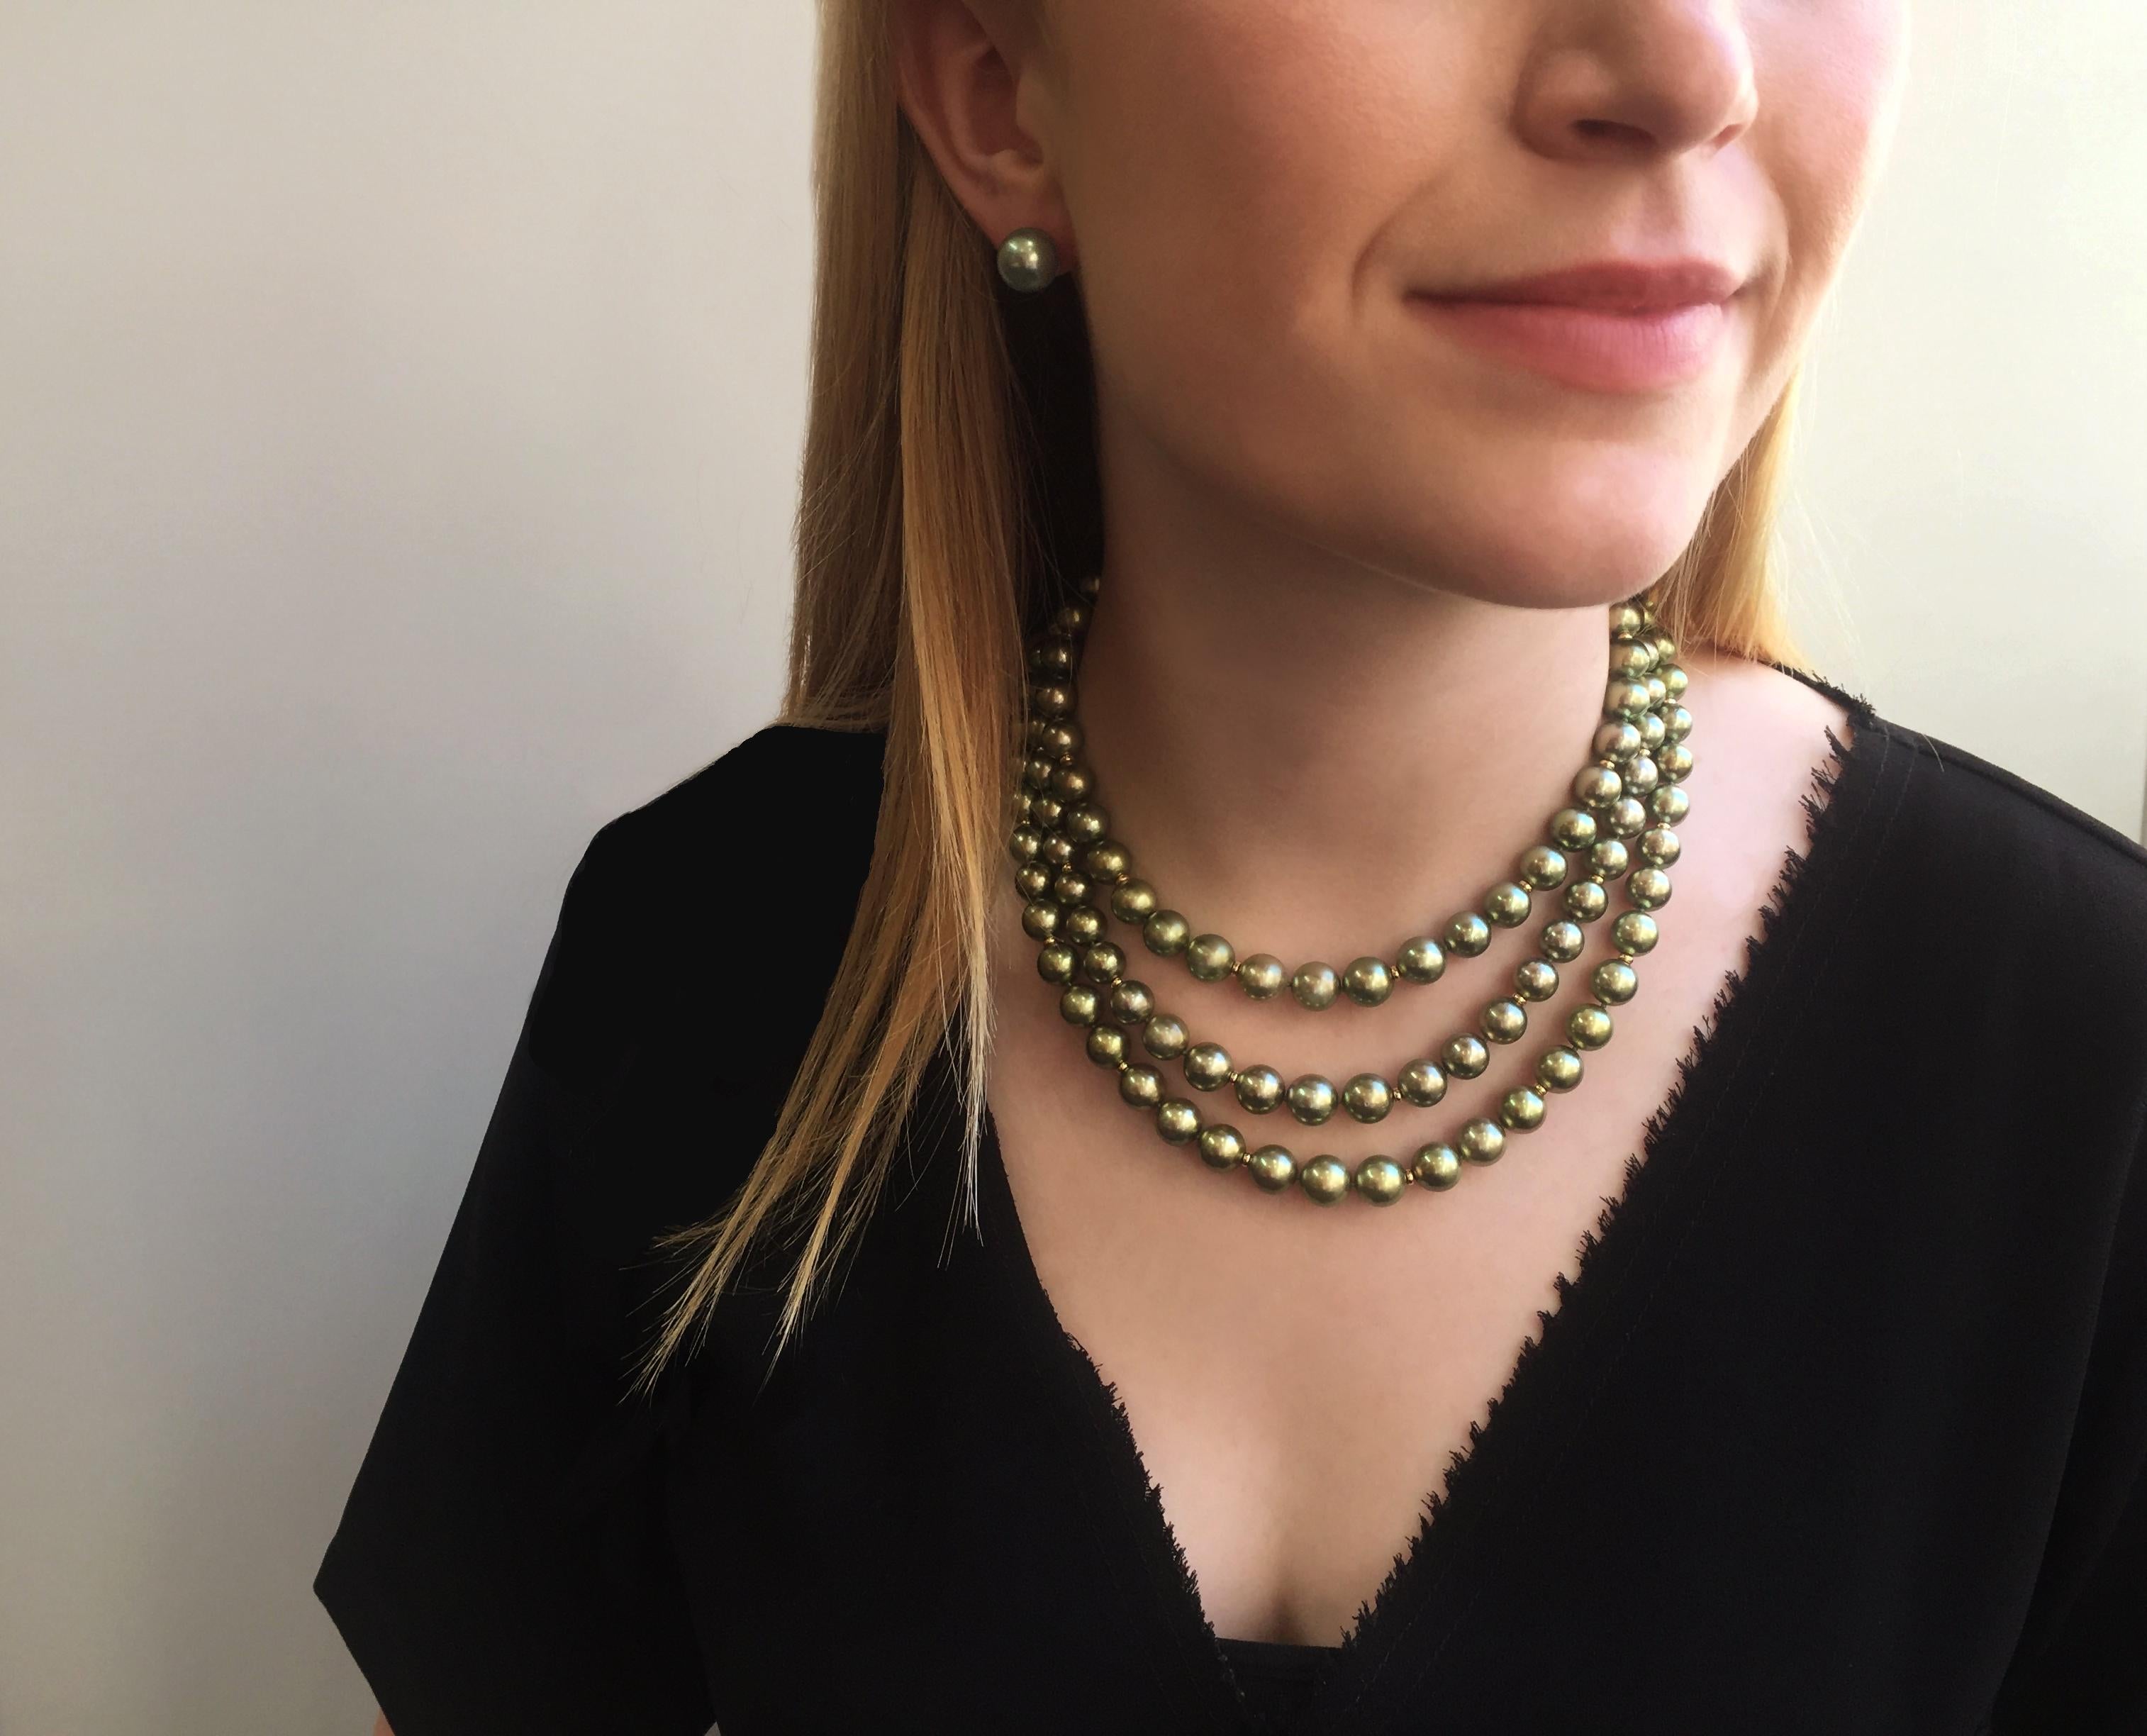 This spectacular necklace from Yoko London features three rows of lustrous Pistachio-Coloured Tahitian Pearls which softly graduate in size from 8-11mm allowing the necklace to sit elegantly upon its wearer’s neck. Completed with an 18 Karat Yellow